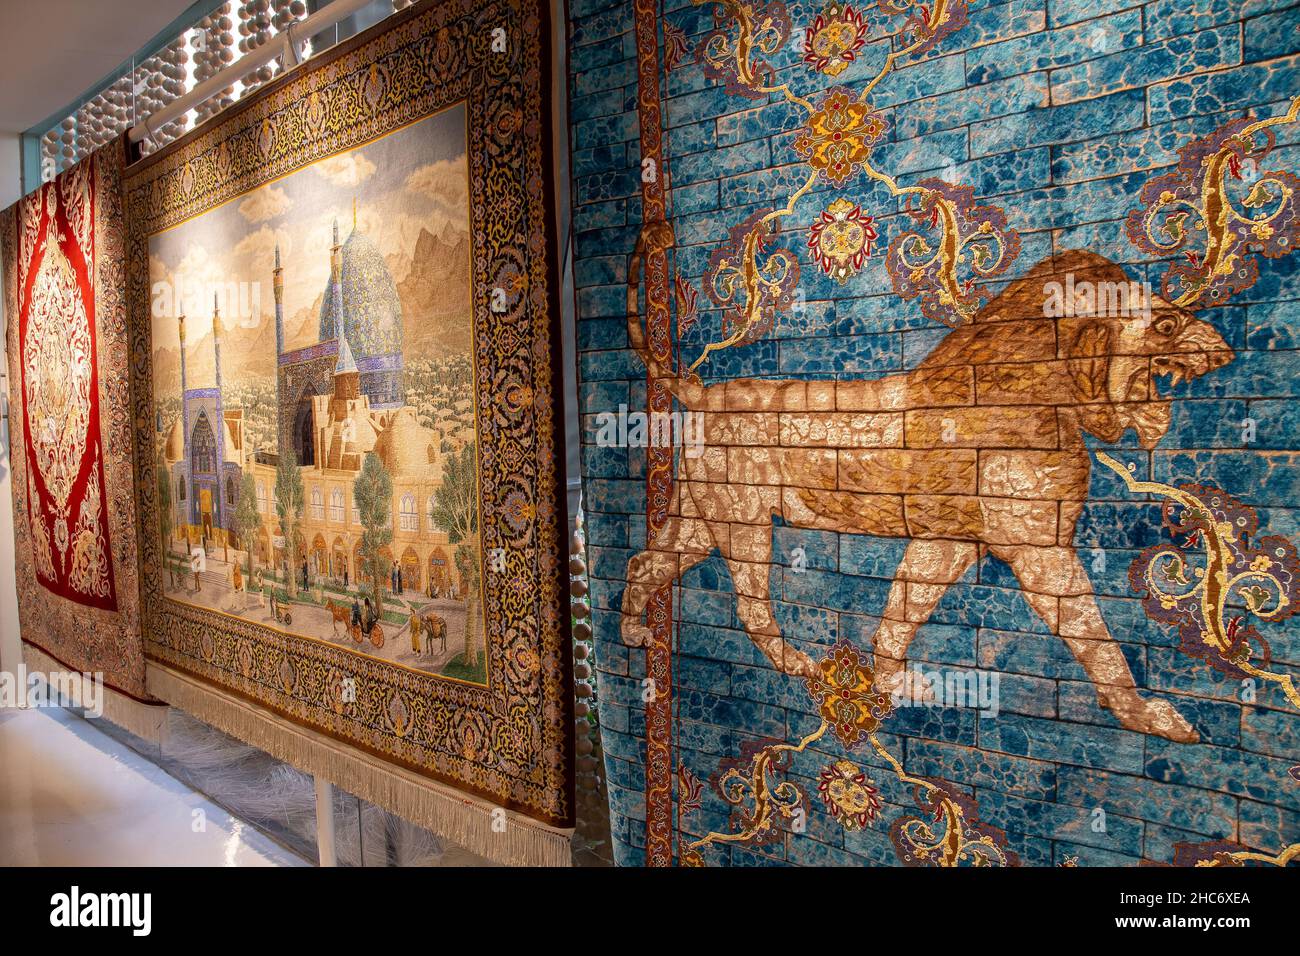 Ancient artifacts displayed in the Iran Pavilion of Expo 2020 in Dubai, UAE Stock Photo